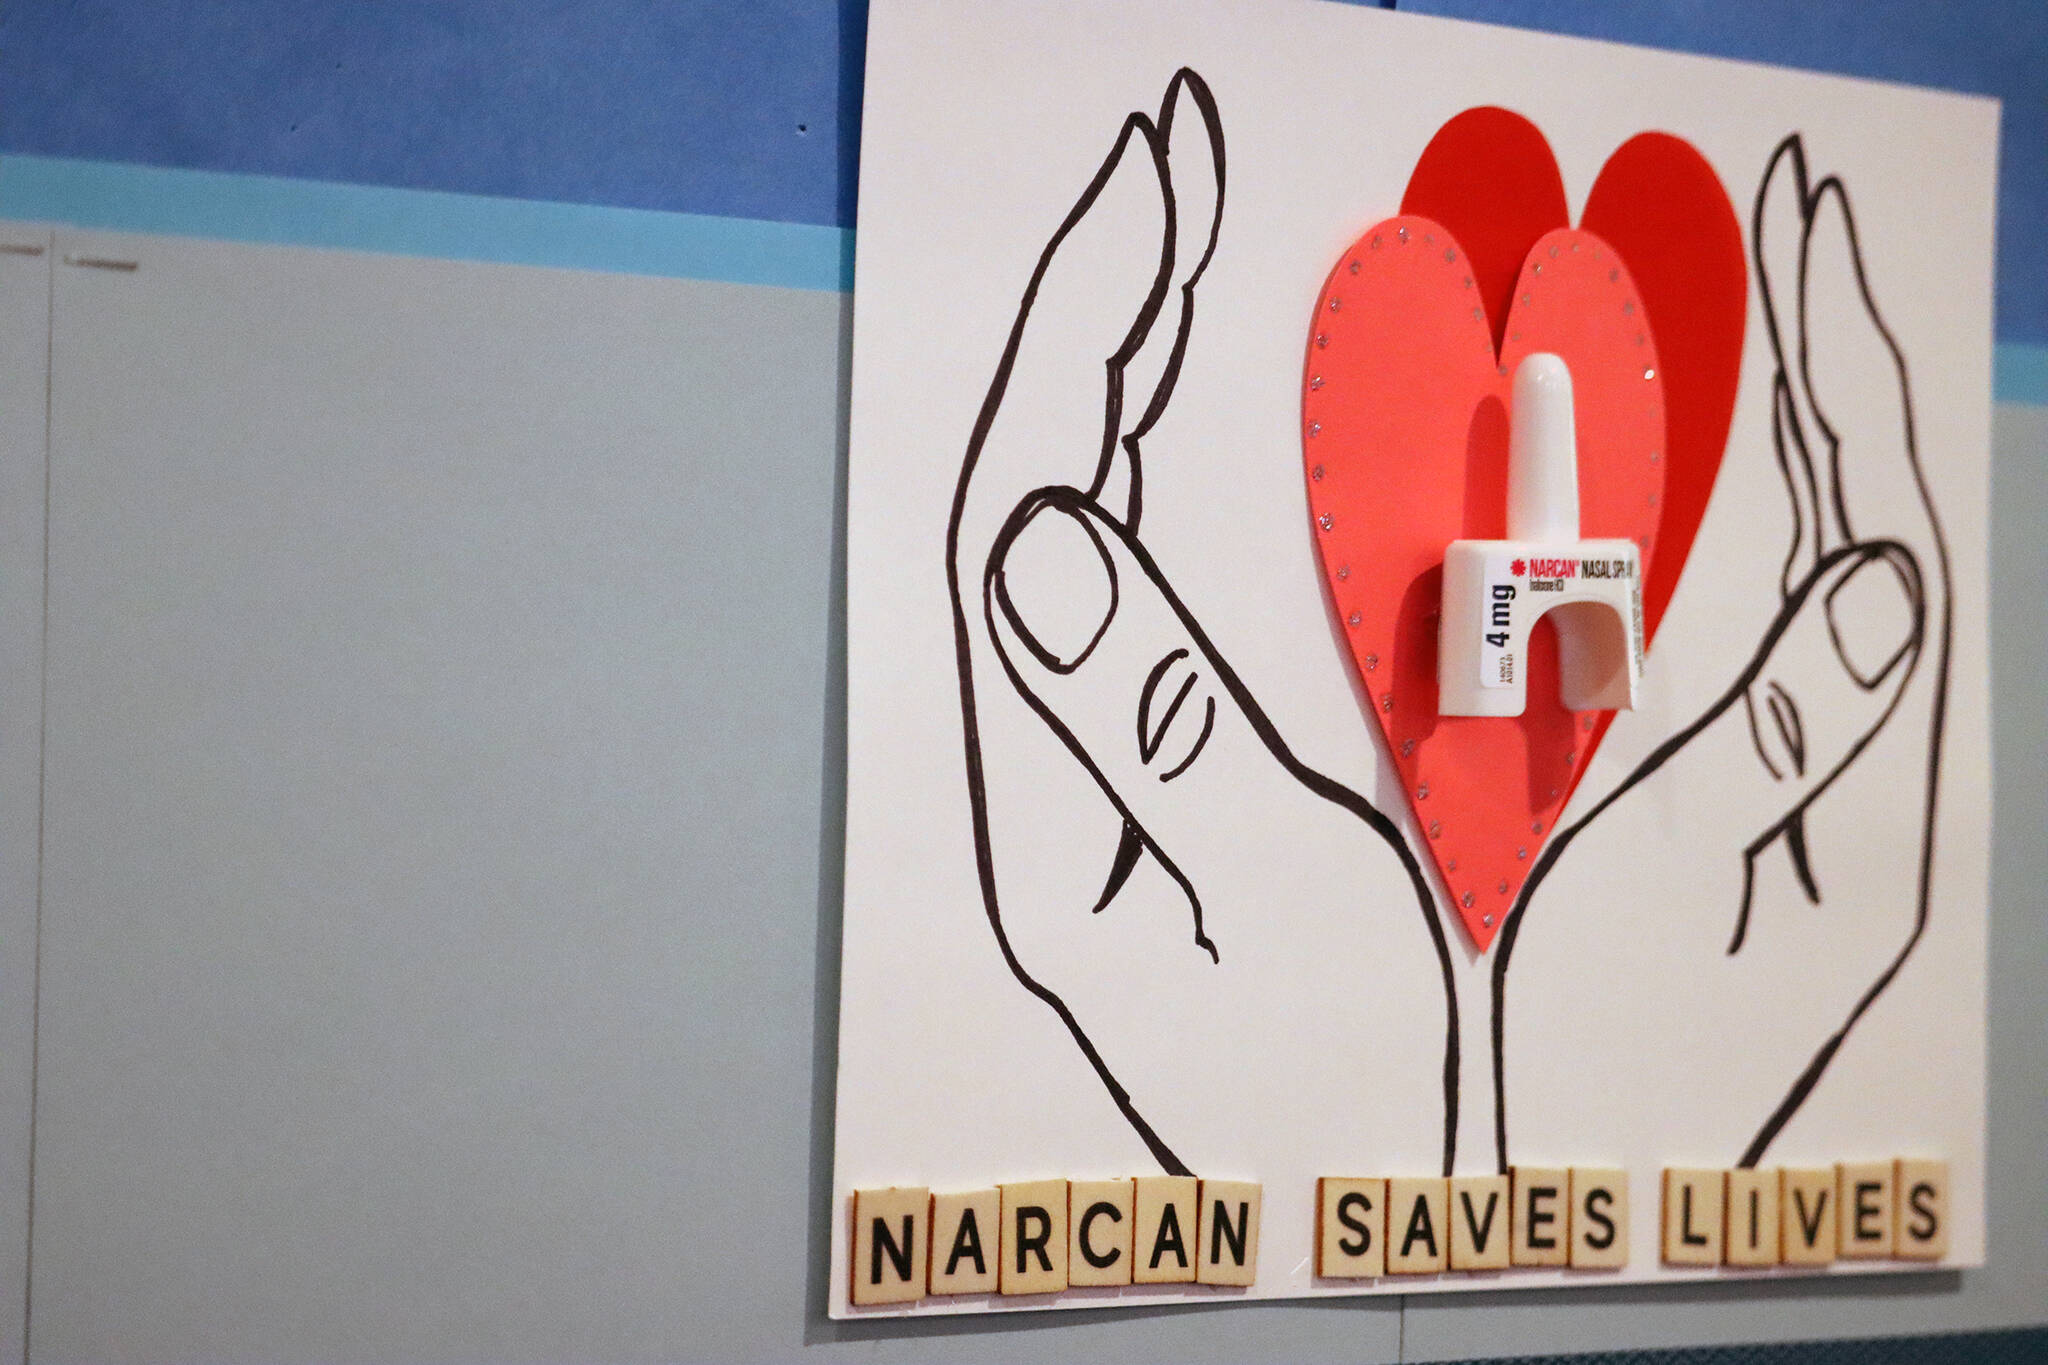 A poster at Juneau Public Health Center touts the benefits of Narcan. Capital City Fire/Rescue has received 100 kits containing the potentially life-saving drug to distribute to community members who need them beginning in March. (Ben Hohenstatt / Juneau Empire File)